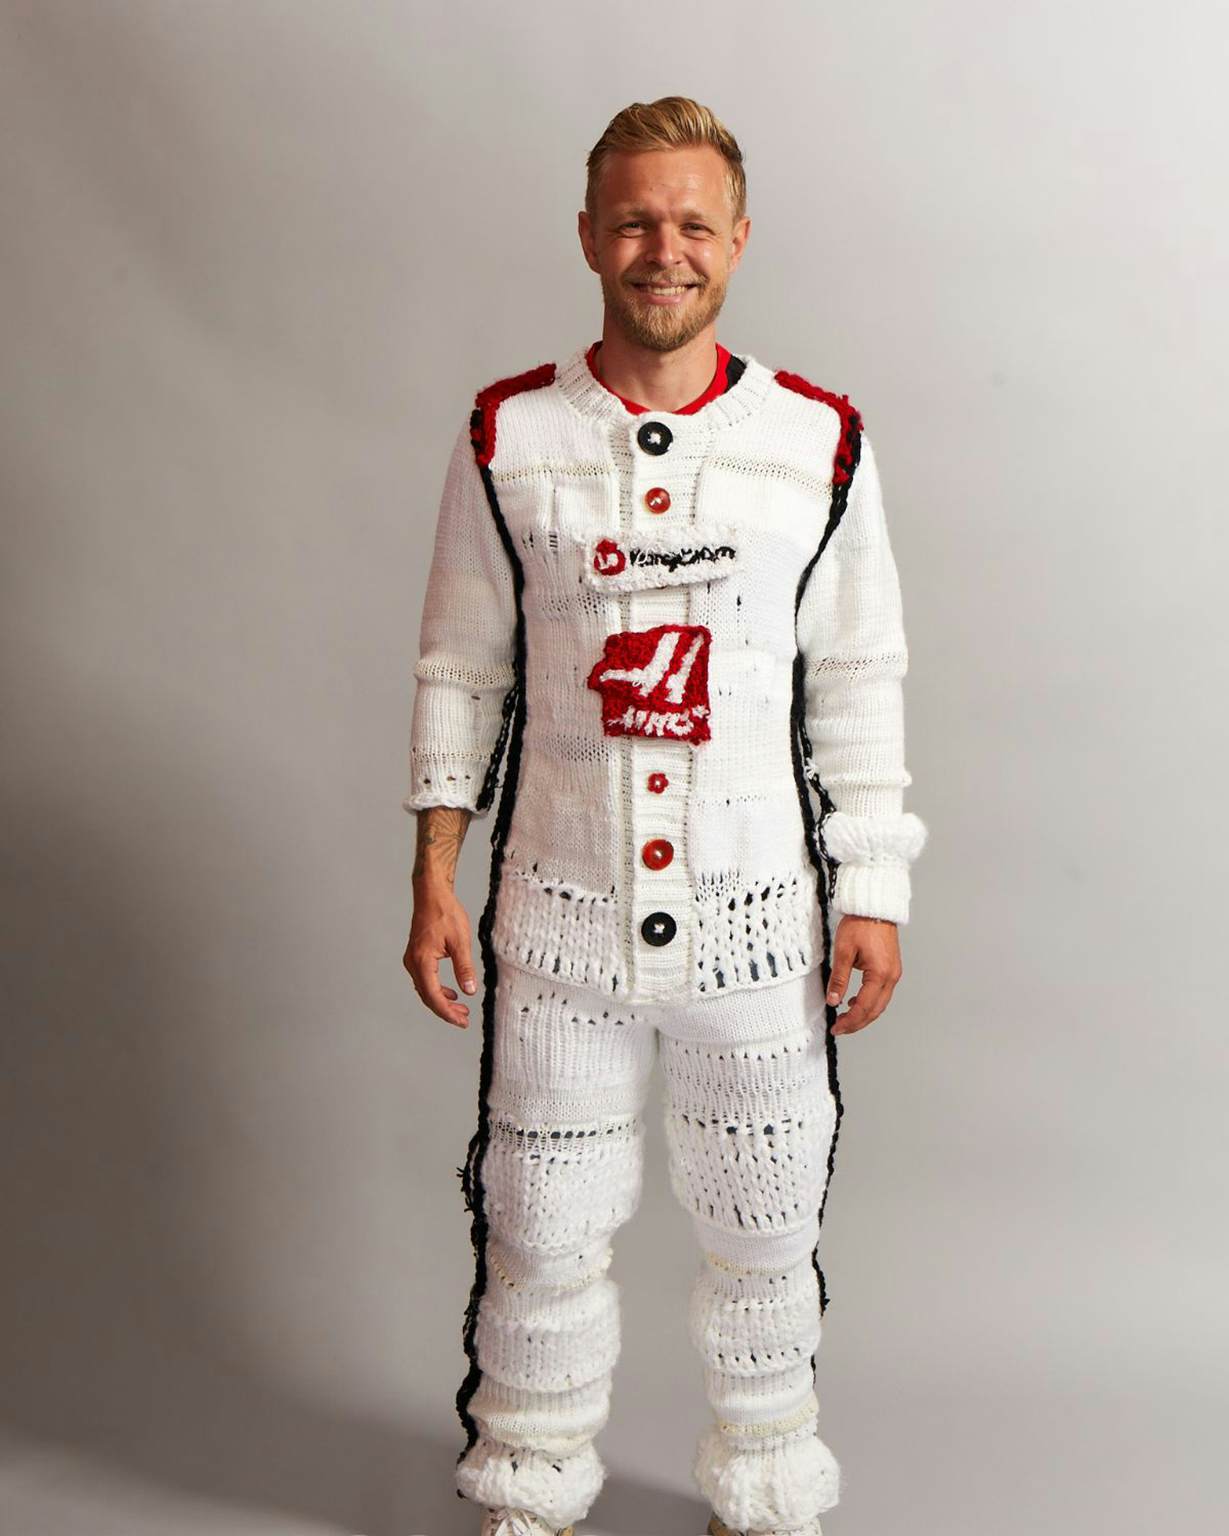 One-of-a-kind Knitted Racing Suit worn by Kevin Magnussen